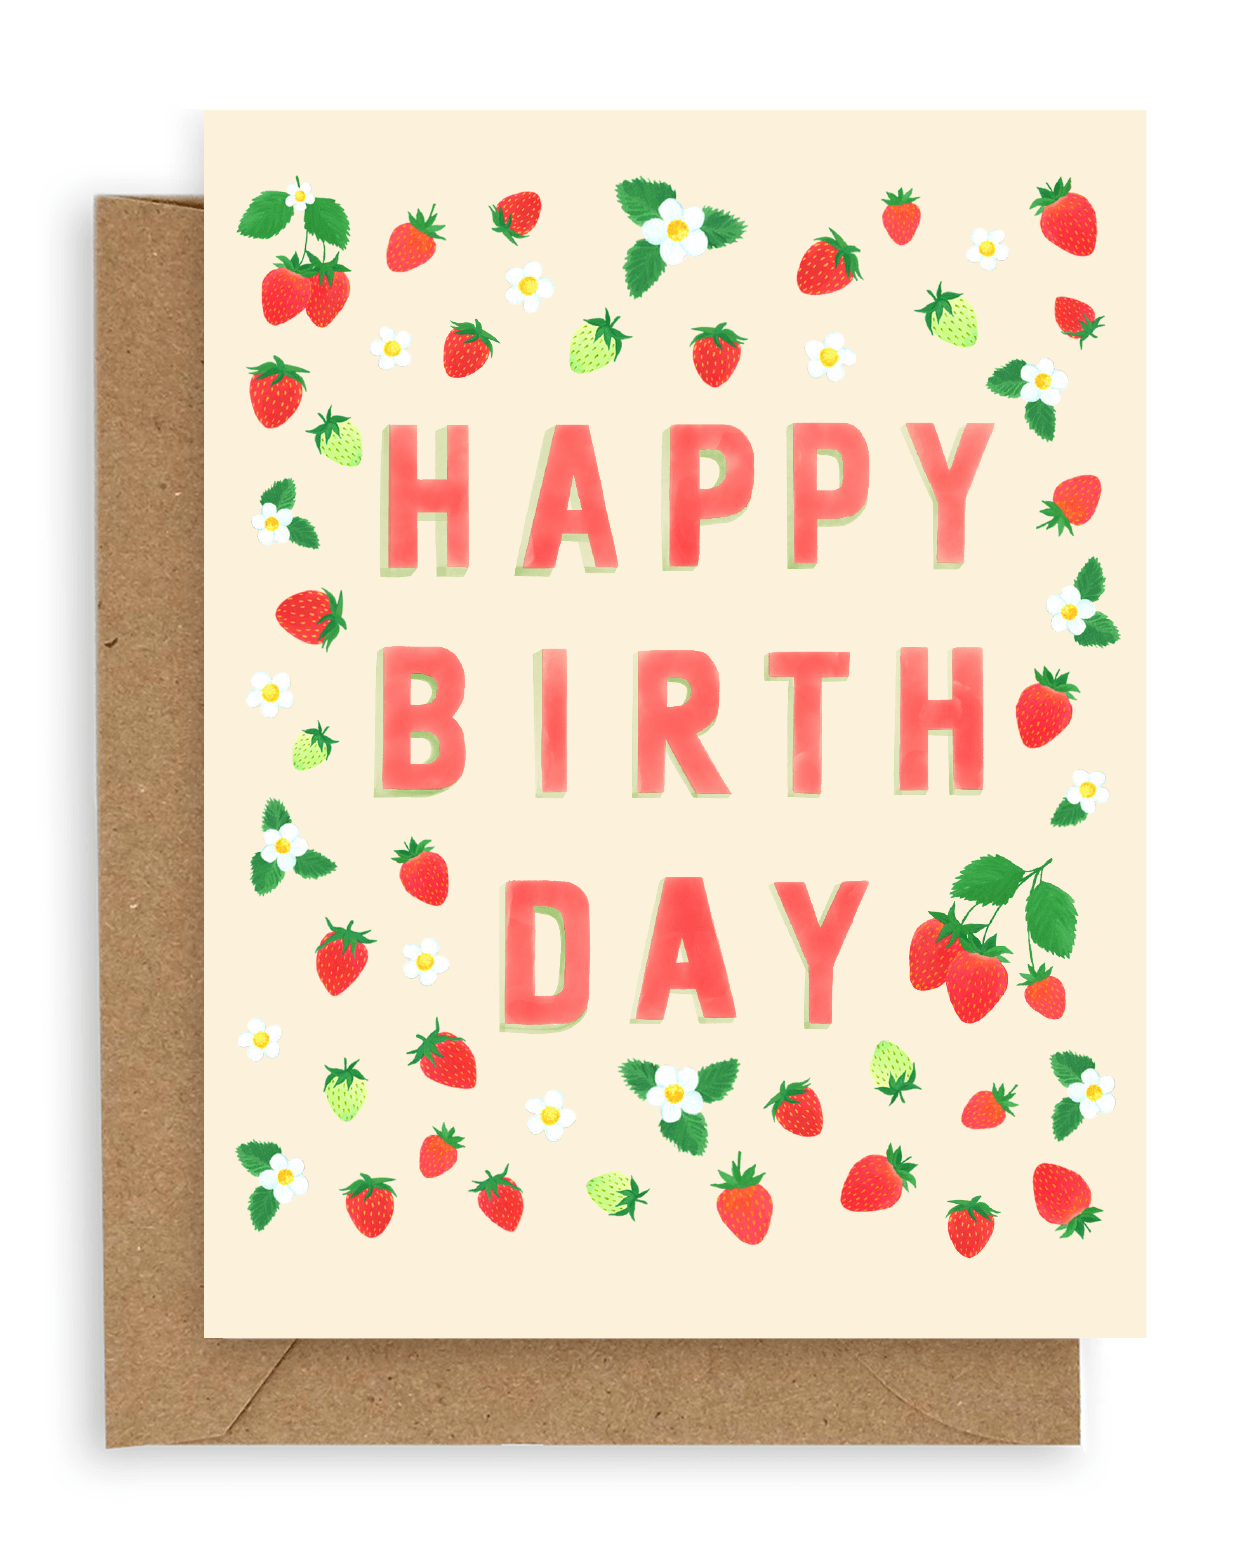 Red and green strawberries and white flowers surround the words &quot;happy birthday&quot; printed in red on a cream background. Shown with kraft envelope.